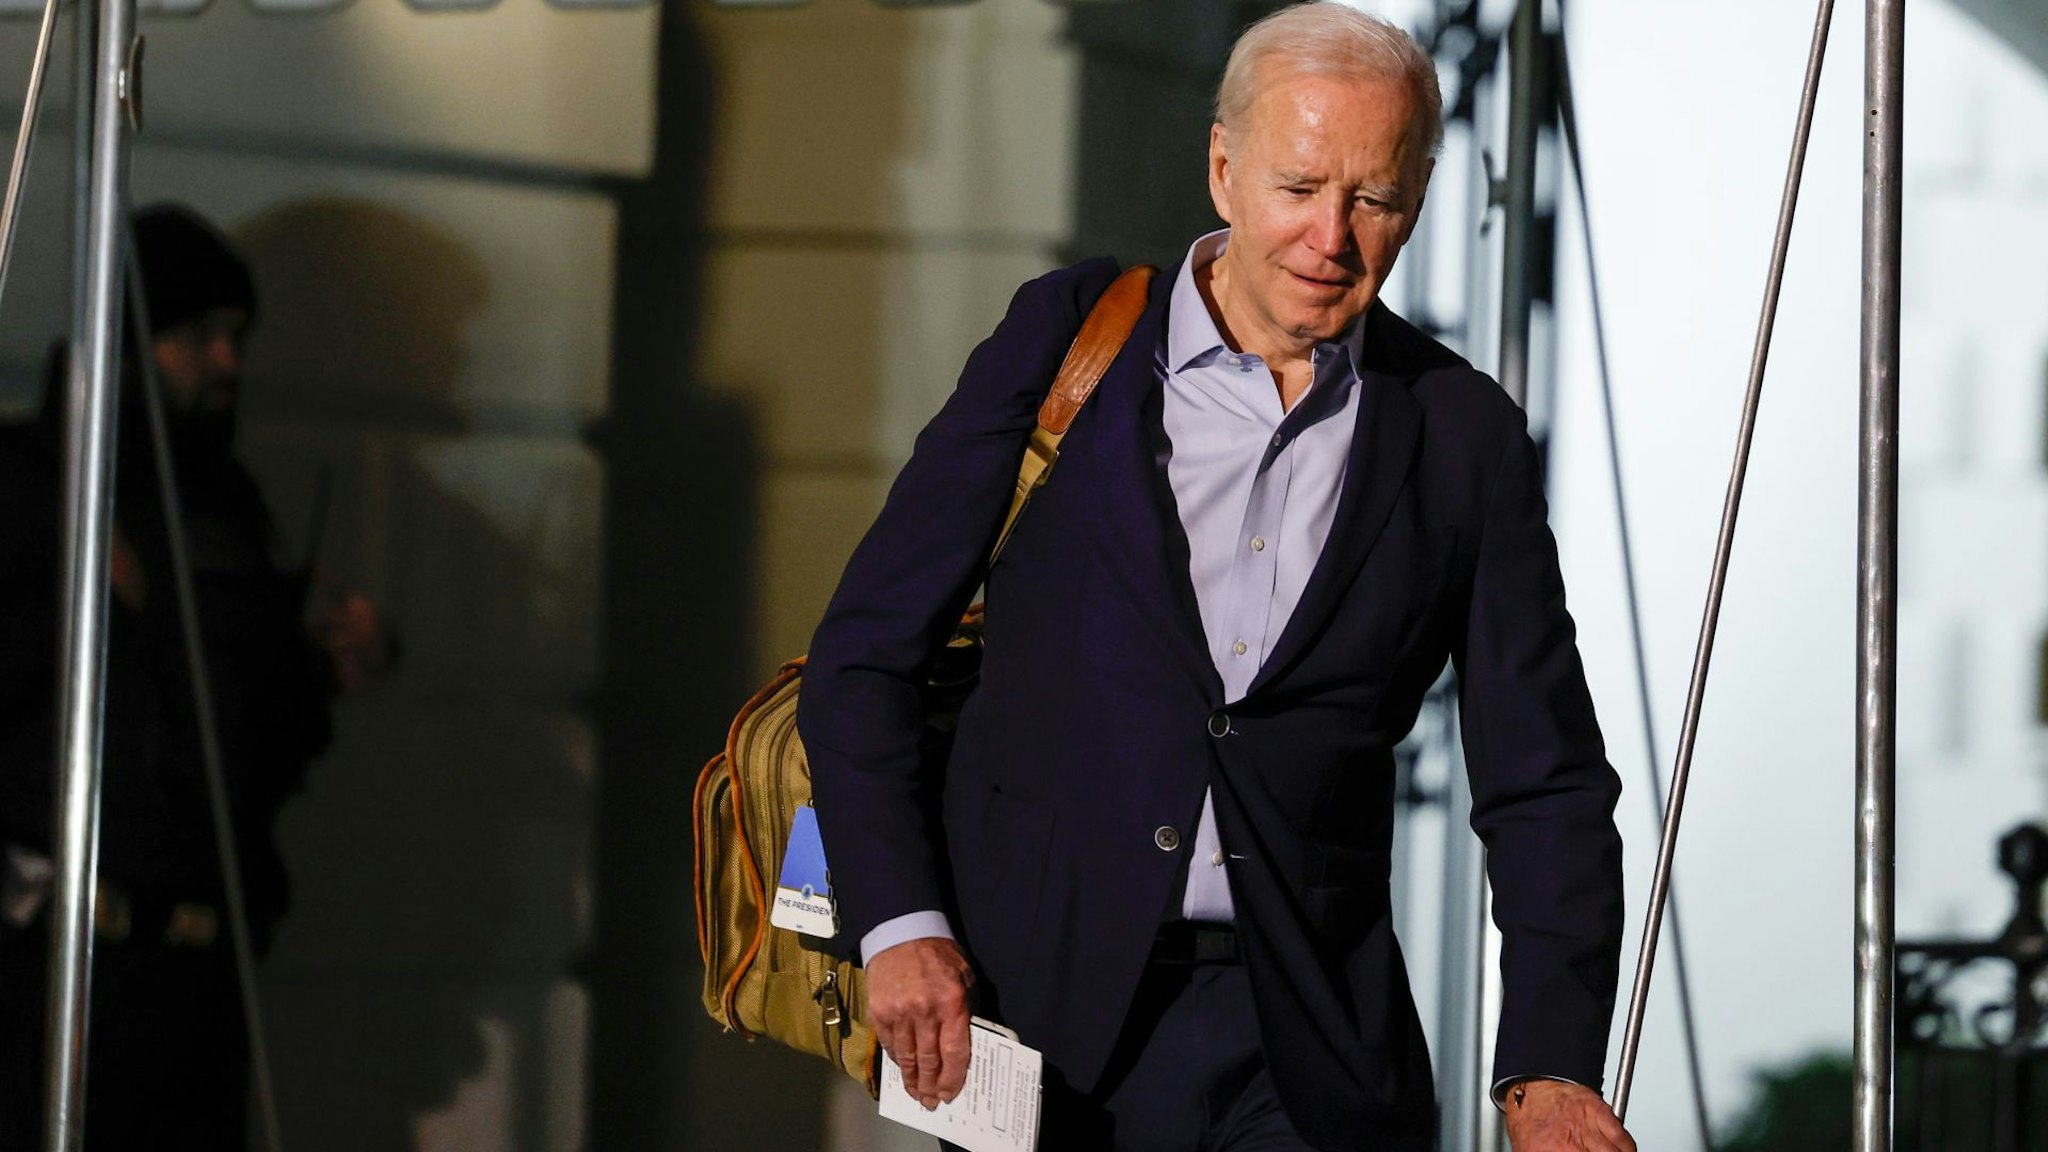 WASHINGTON, DC - DECEMBER 27: U.S. President Joe Biden walks to speak to reporters as he and first lady Jill Biden leave the White House and walk to Marine One on the South Lawn on December 27, 2022 in Washington, DC. The Bidens are spending the New Years holiday in St. Croix, United States Virgin Islands.